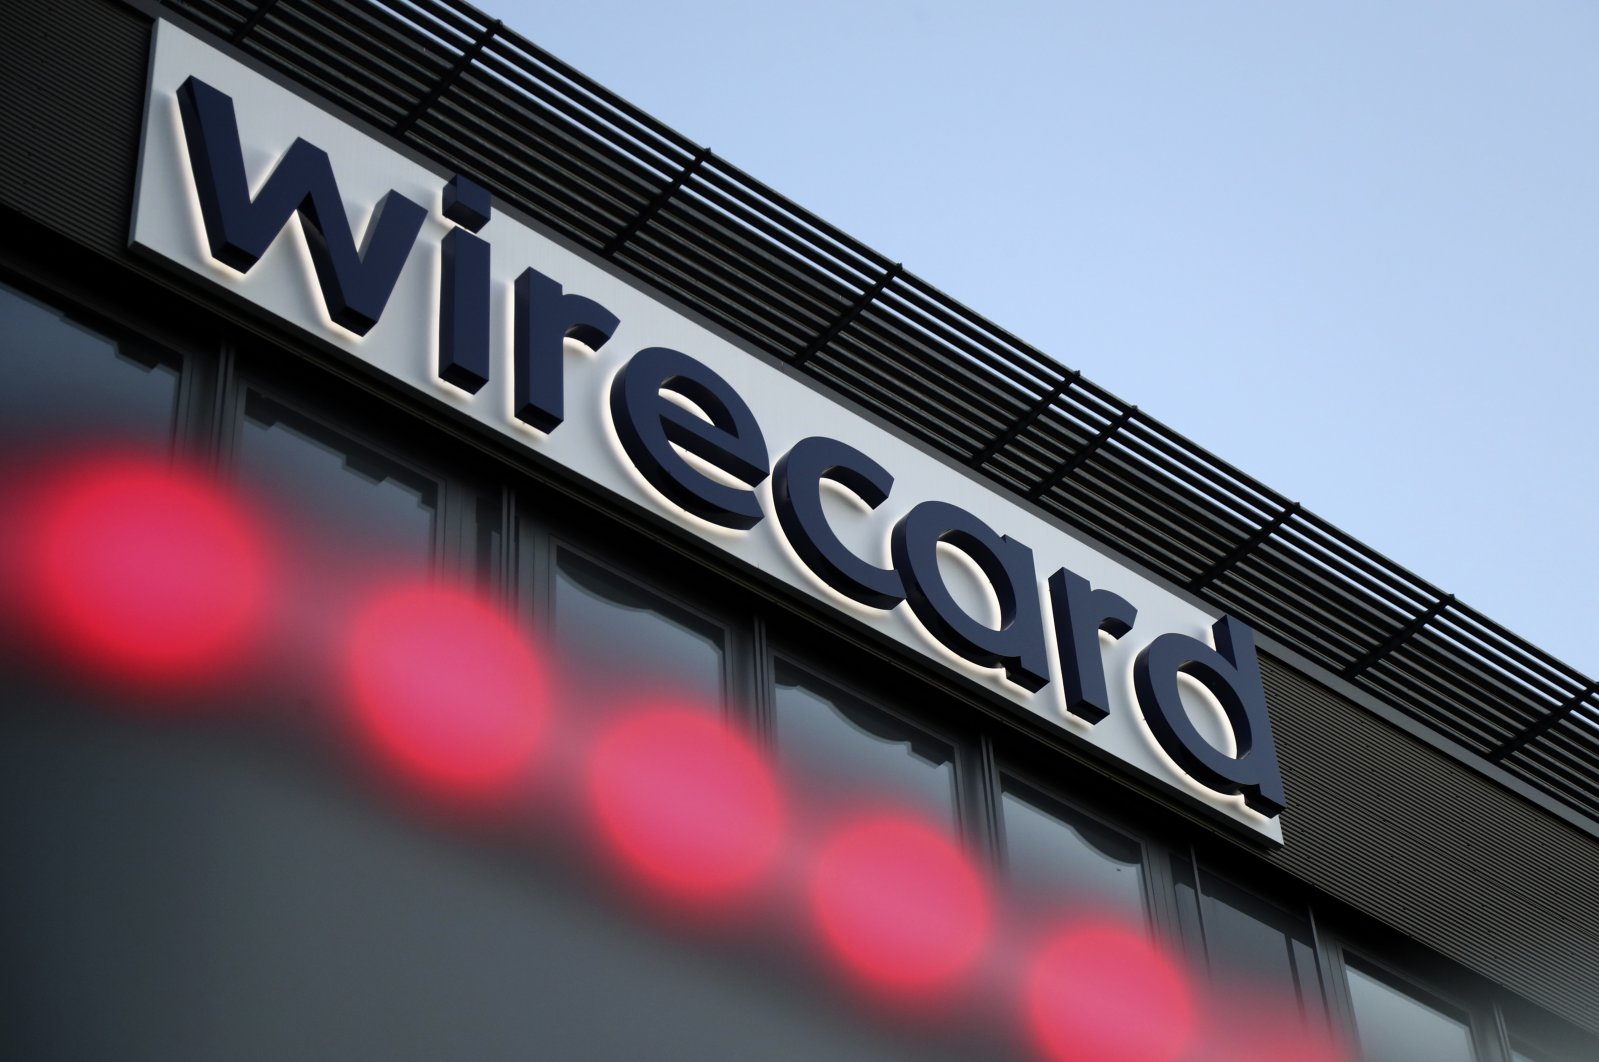 The logo of the payment company Wirecard is pictured at the headquarters in Munich, Germany, July 20, 2020. (AP Photo)